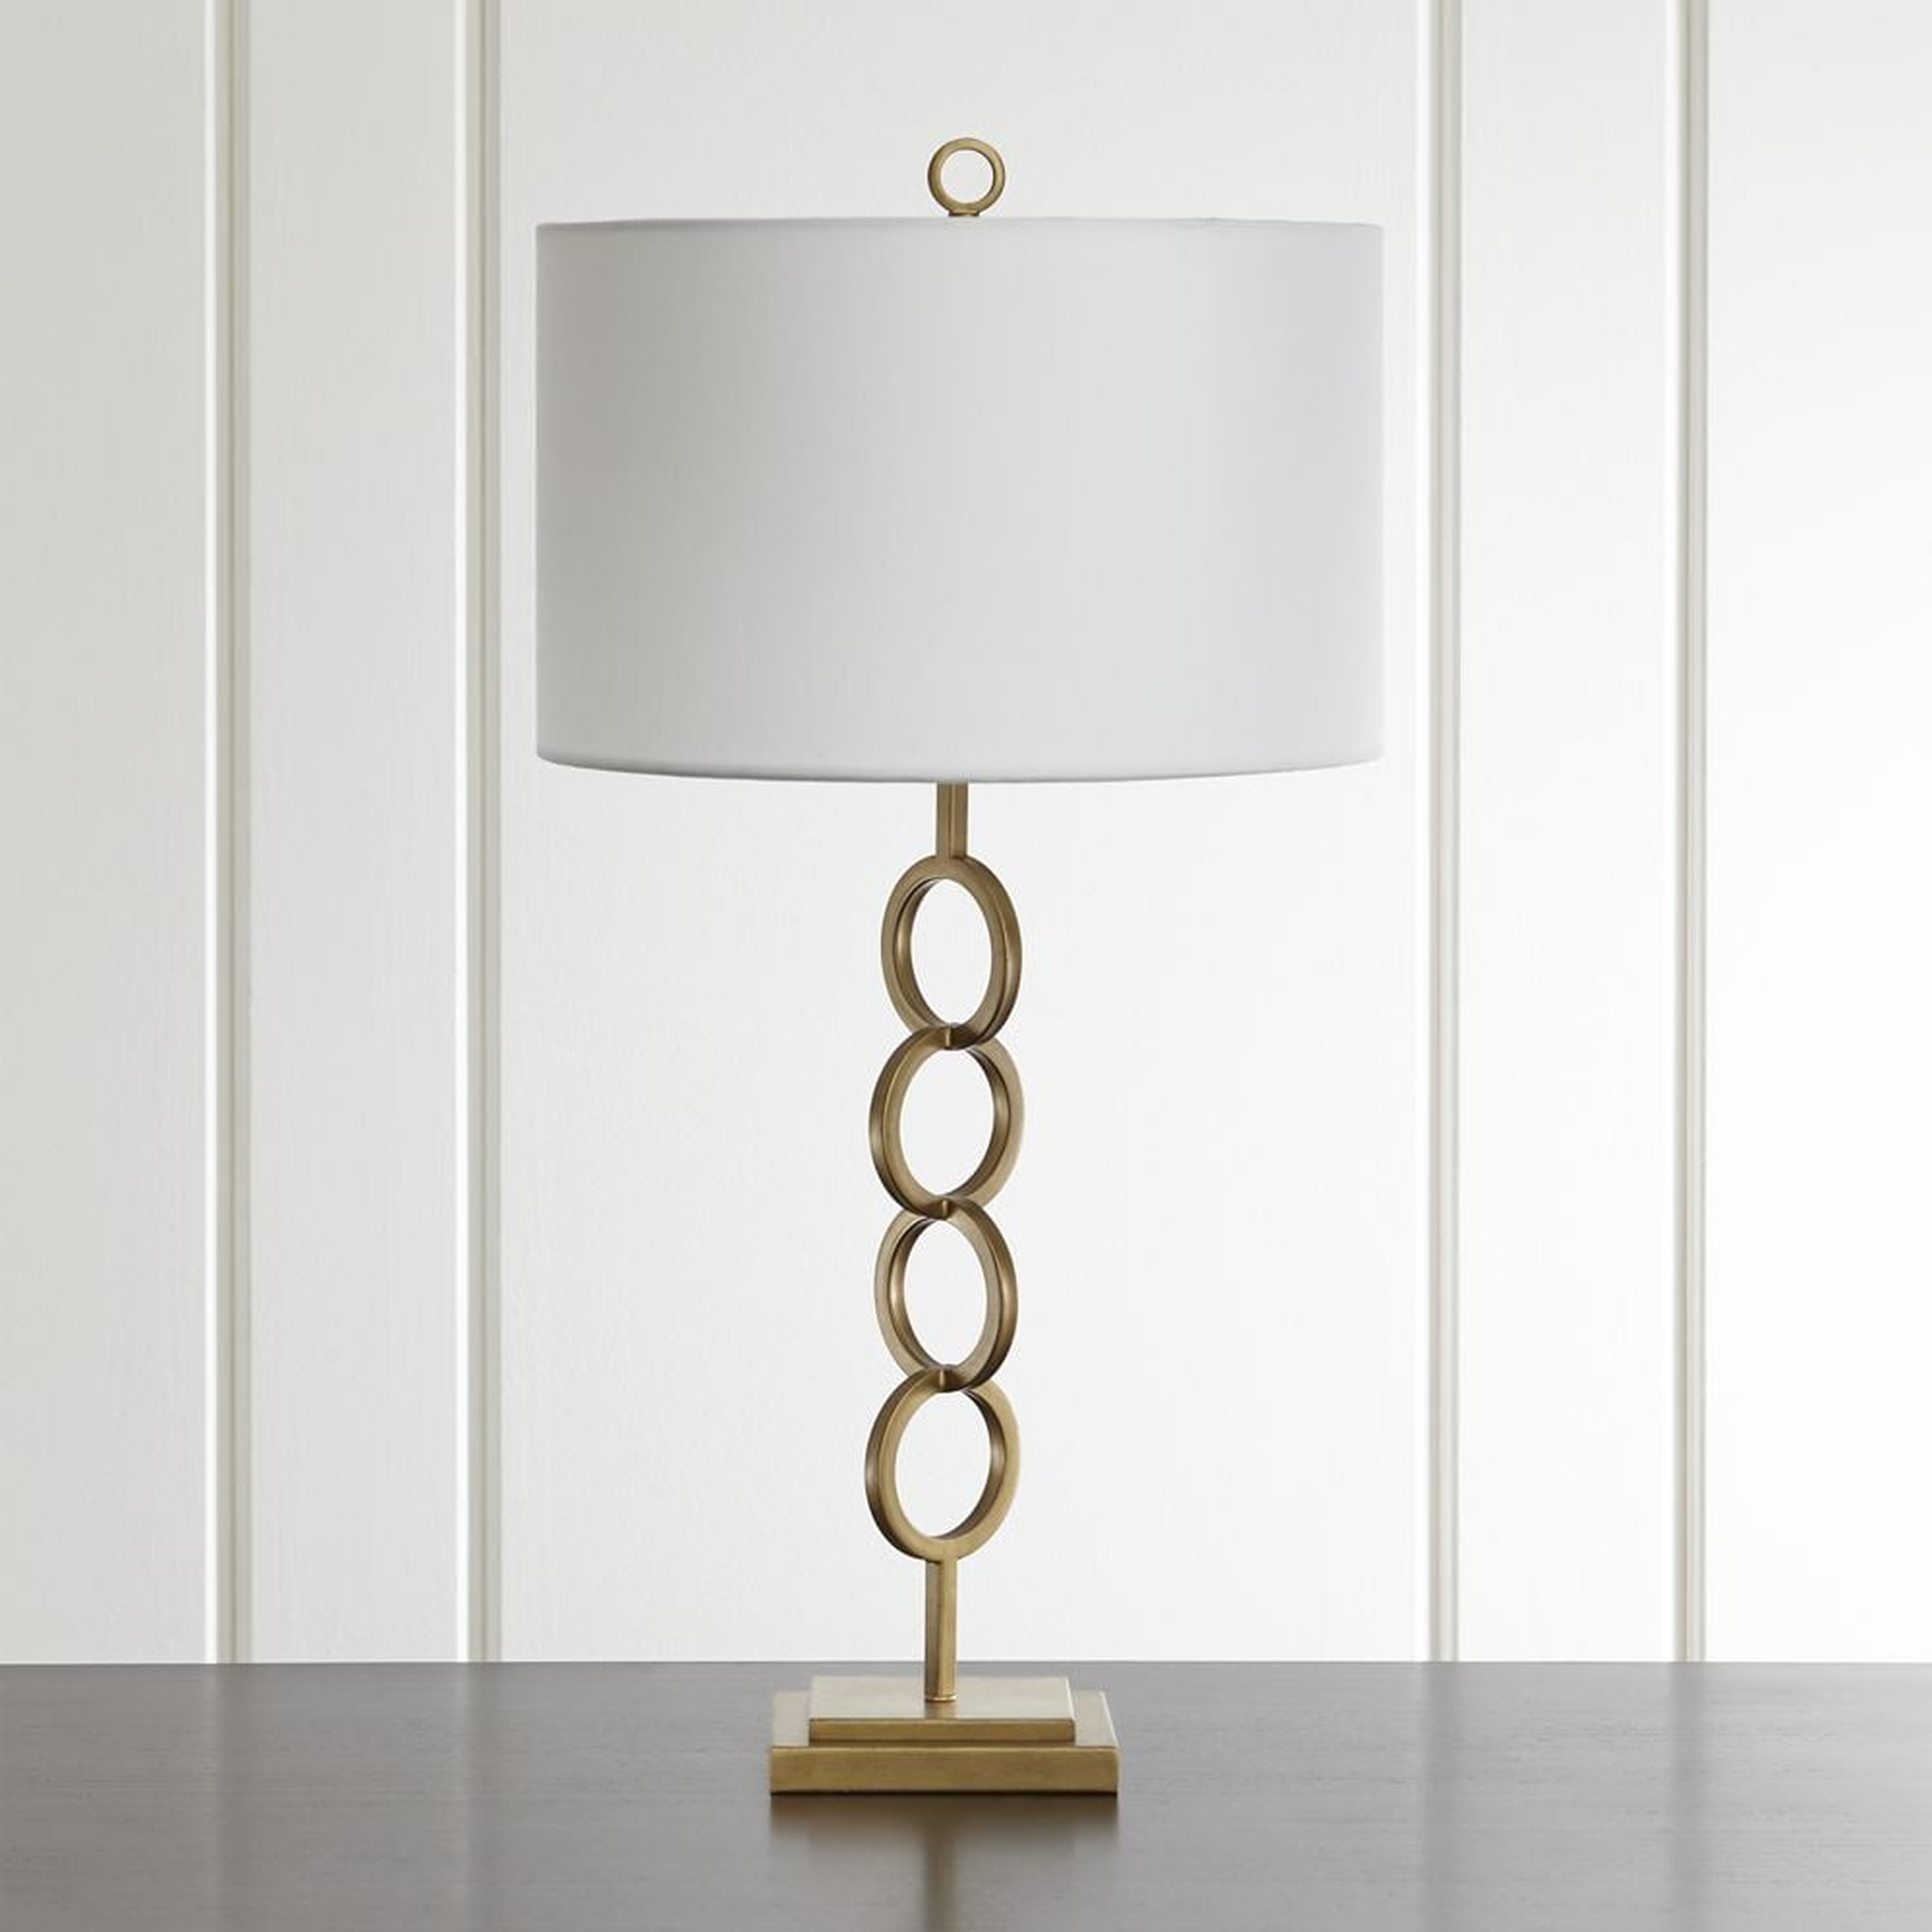 Axiom Brass Table Lamp - Crate and Barrel